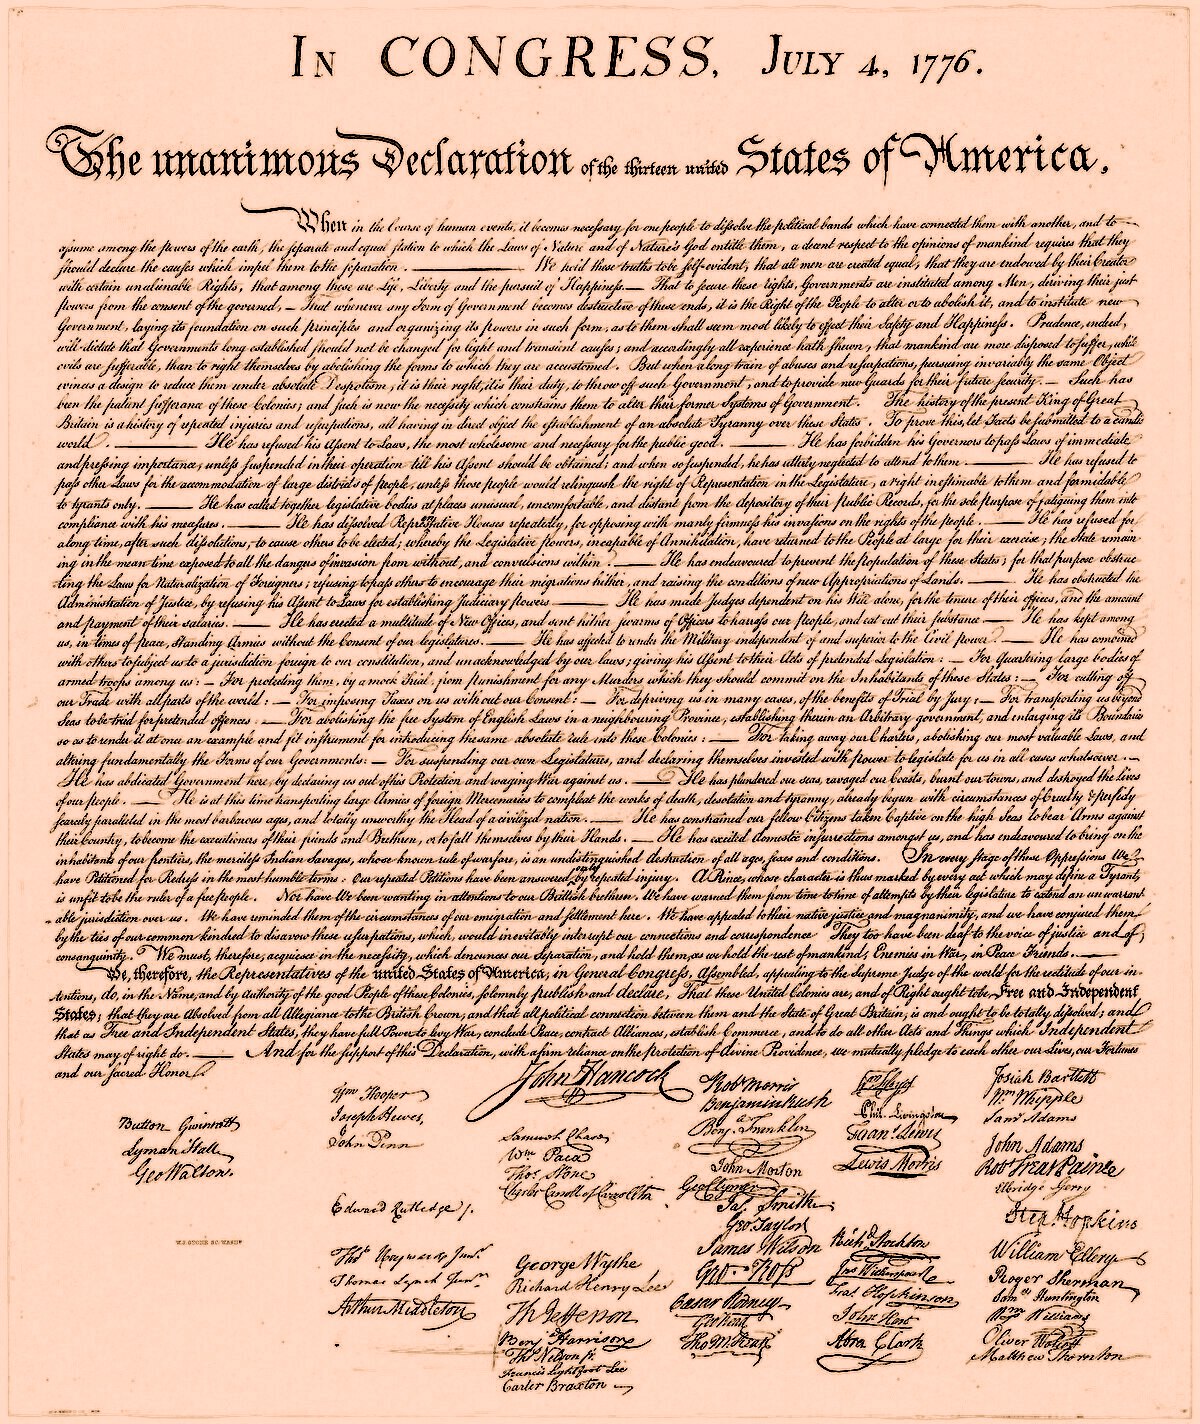 A NEW DECLARATION OF INDEPENDENCE FOR THE PEOPLE OF THE UNITED STATES OF AMERICA IN 2022